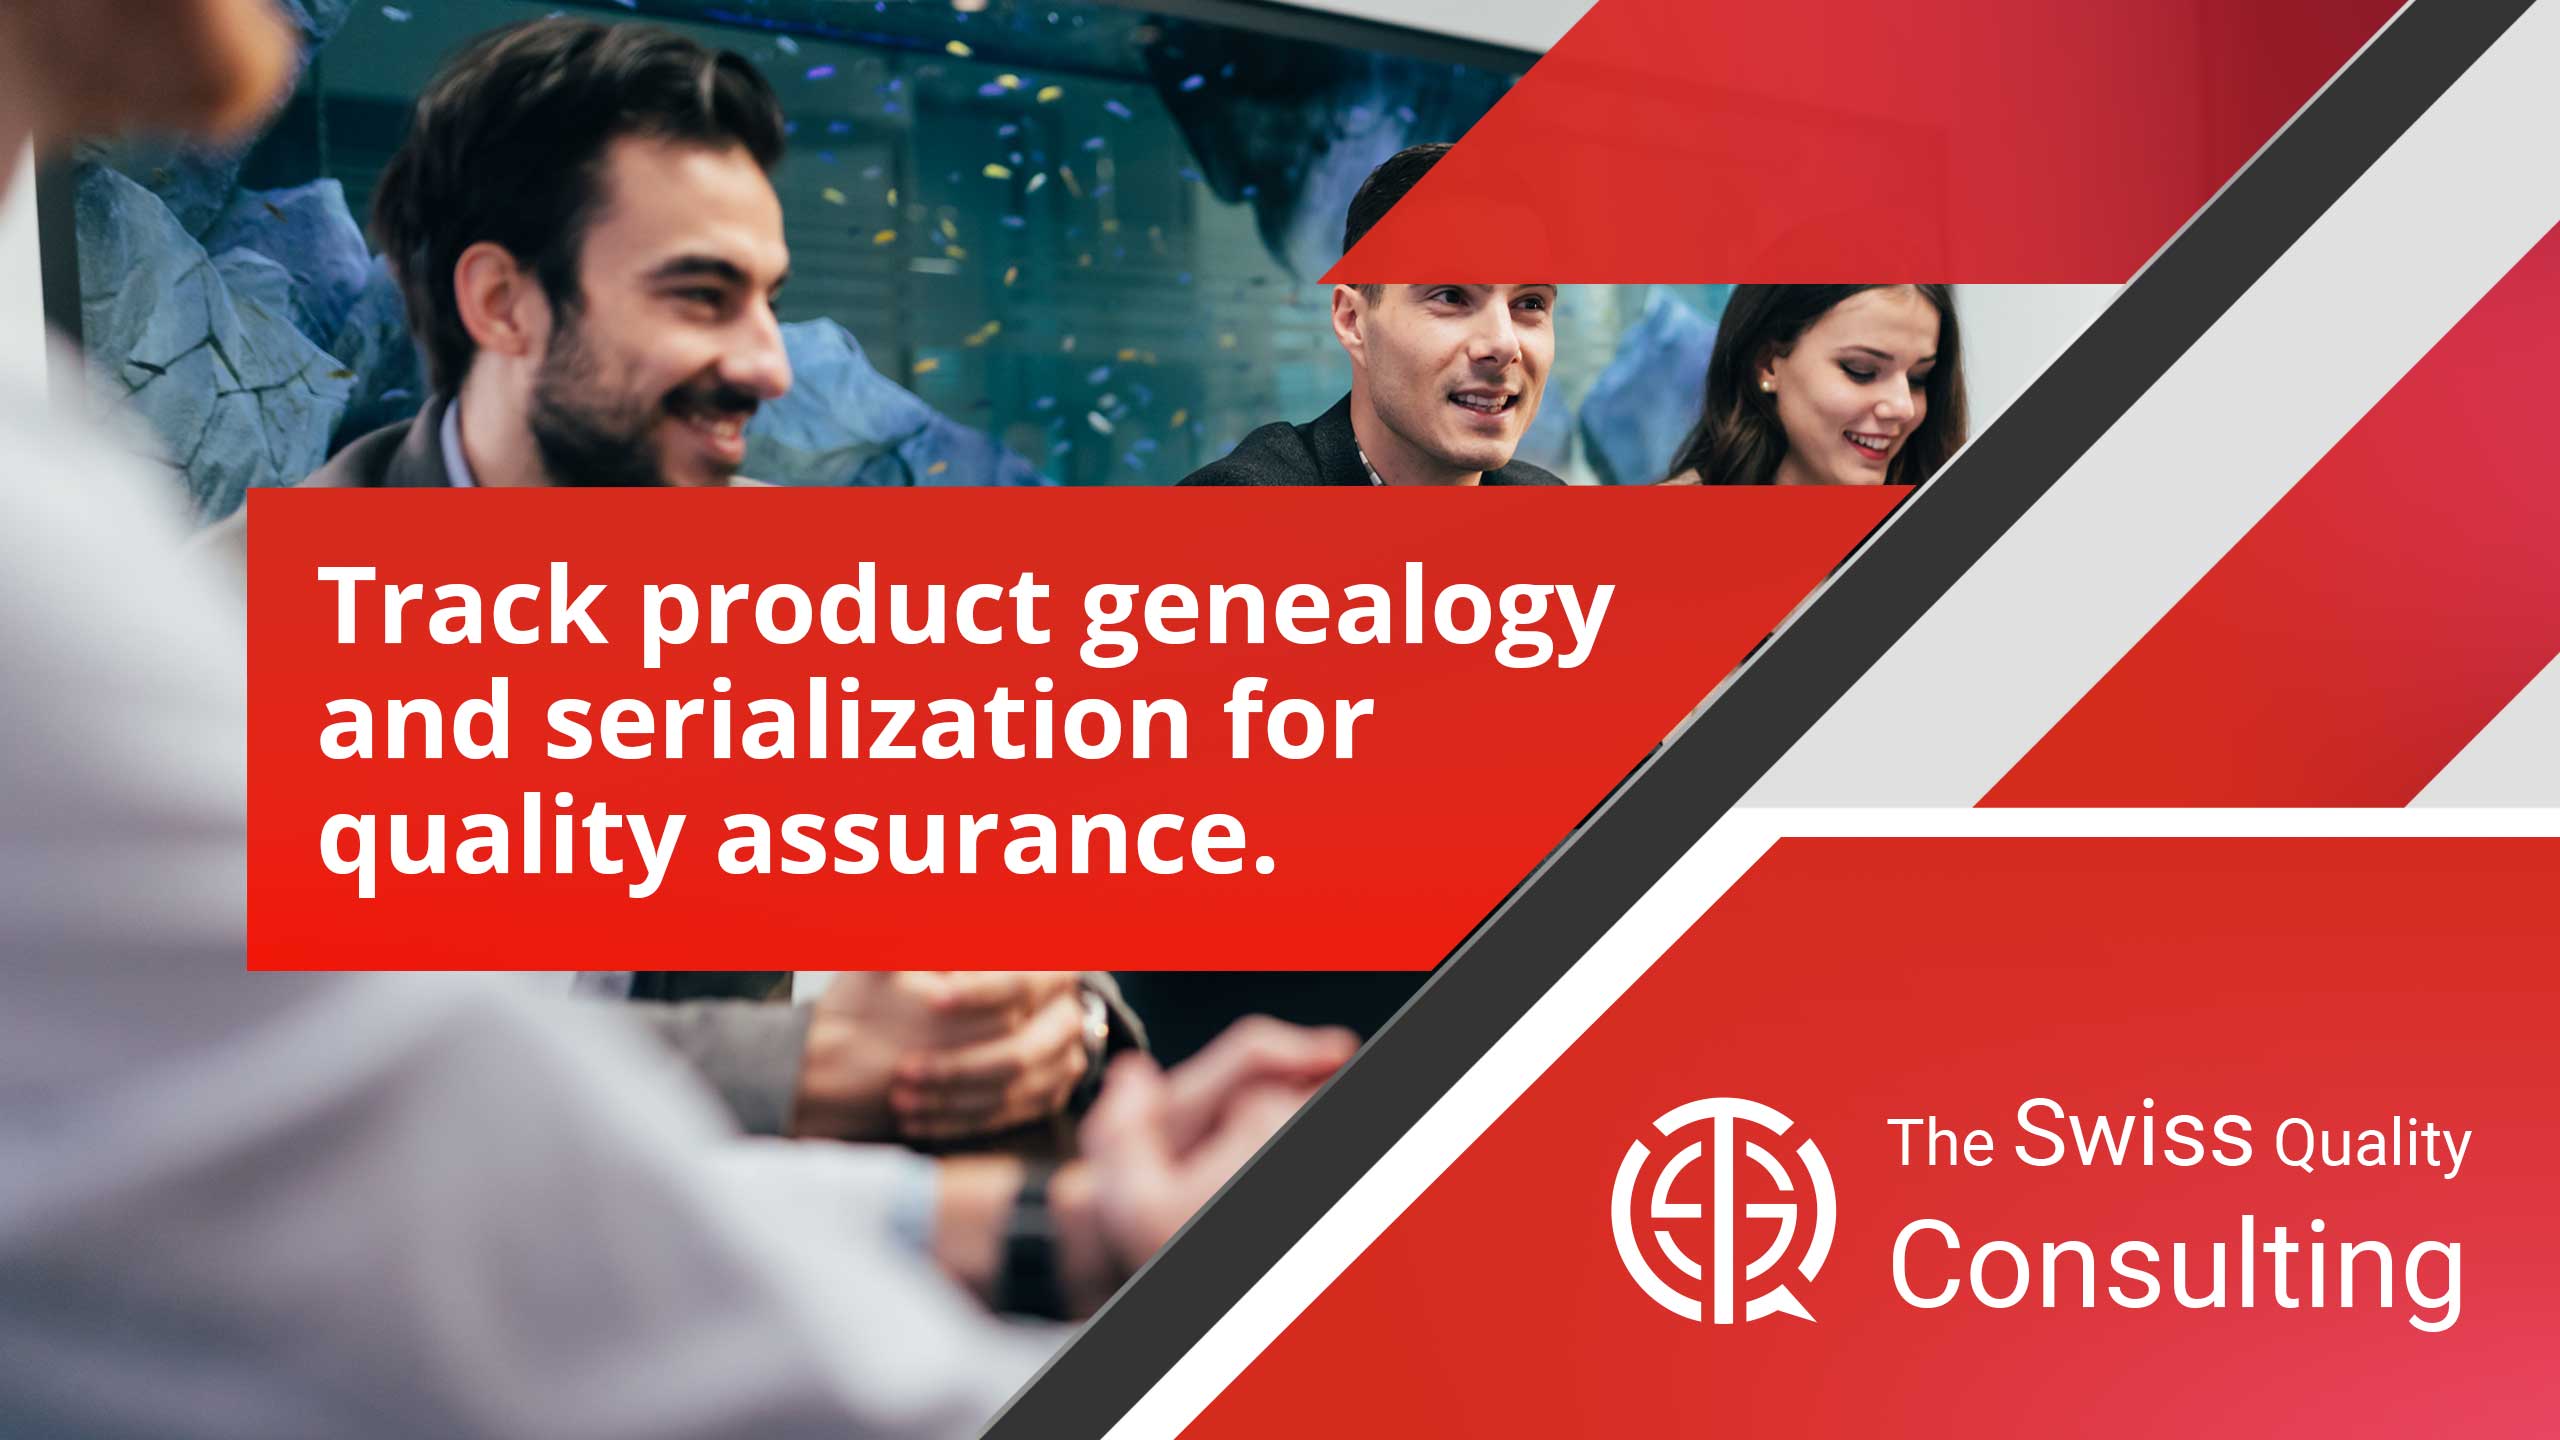 Tracking Product Genealogy and Serialization